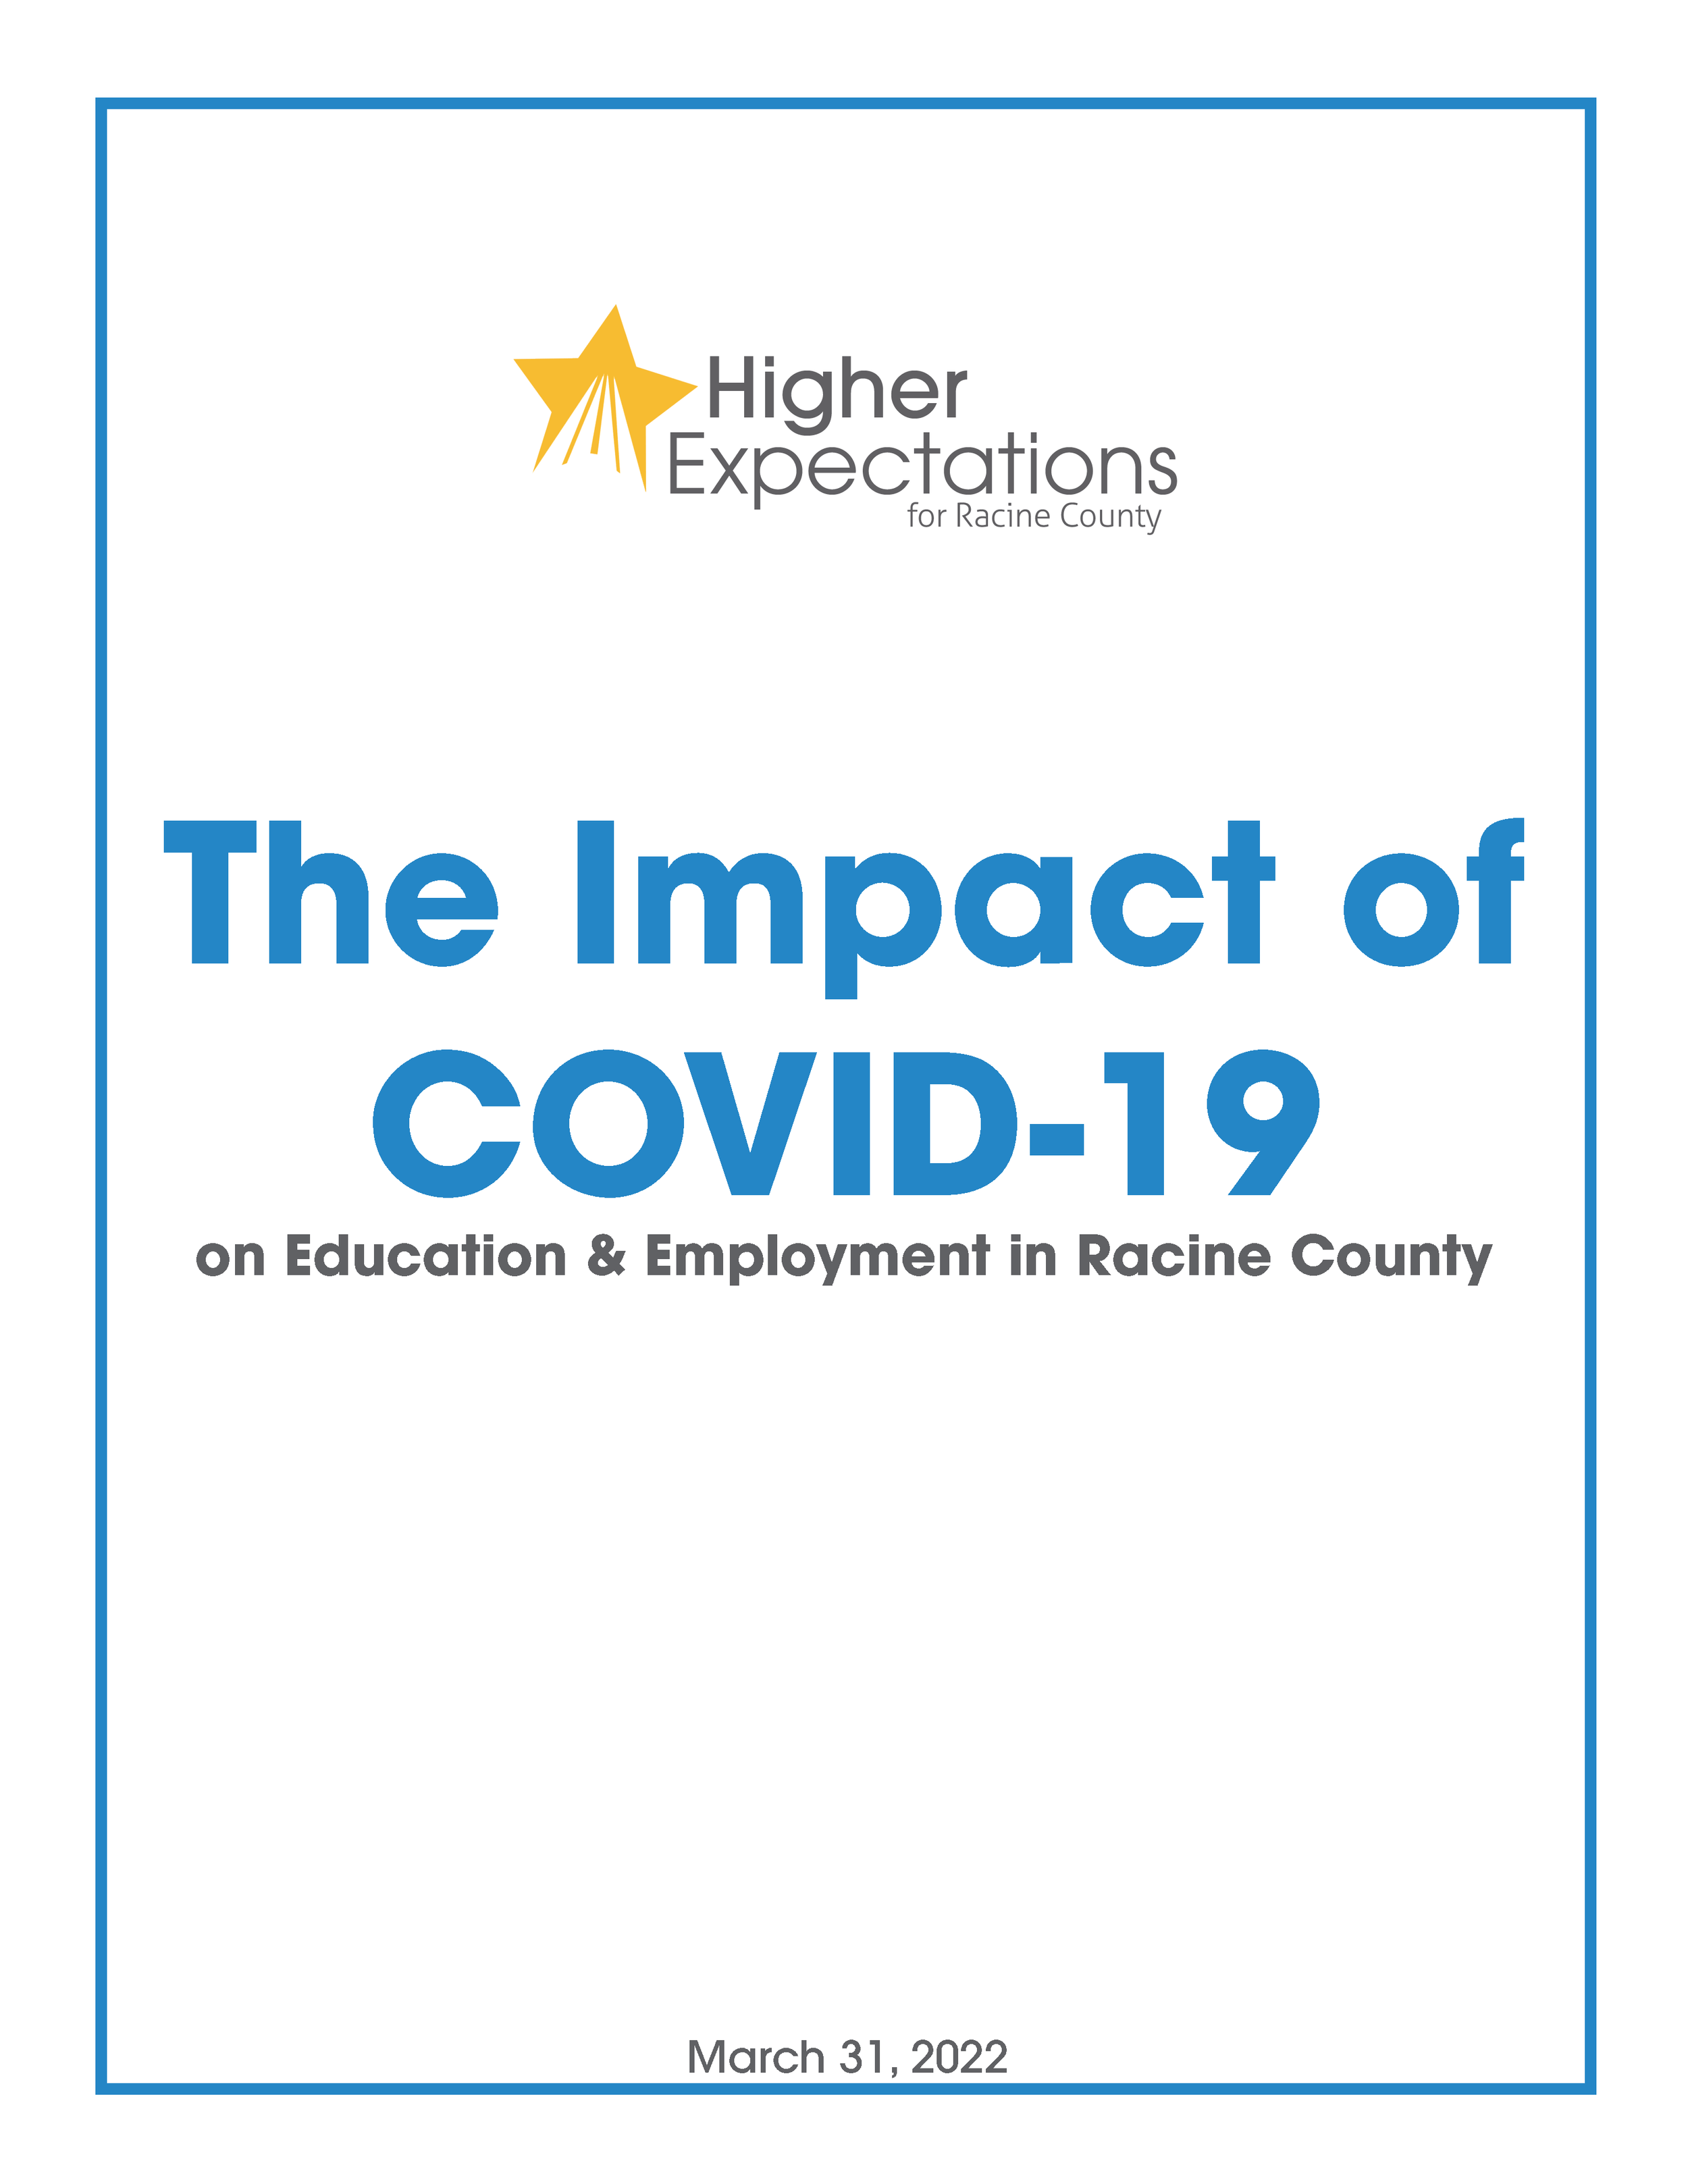 The Impact of Covid-19